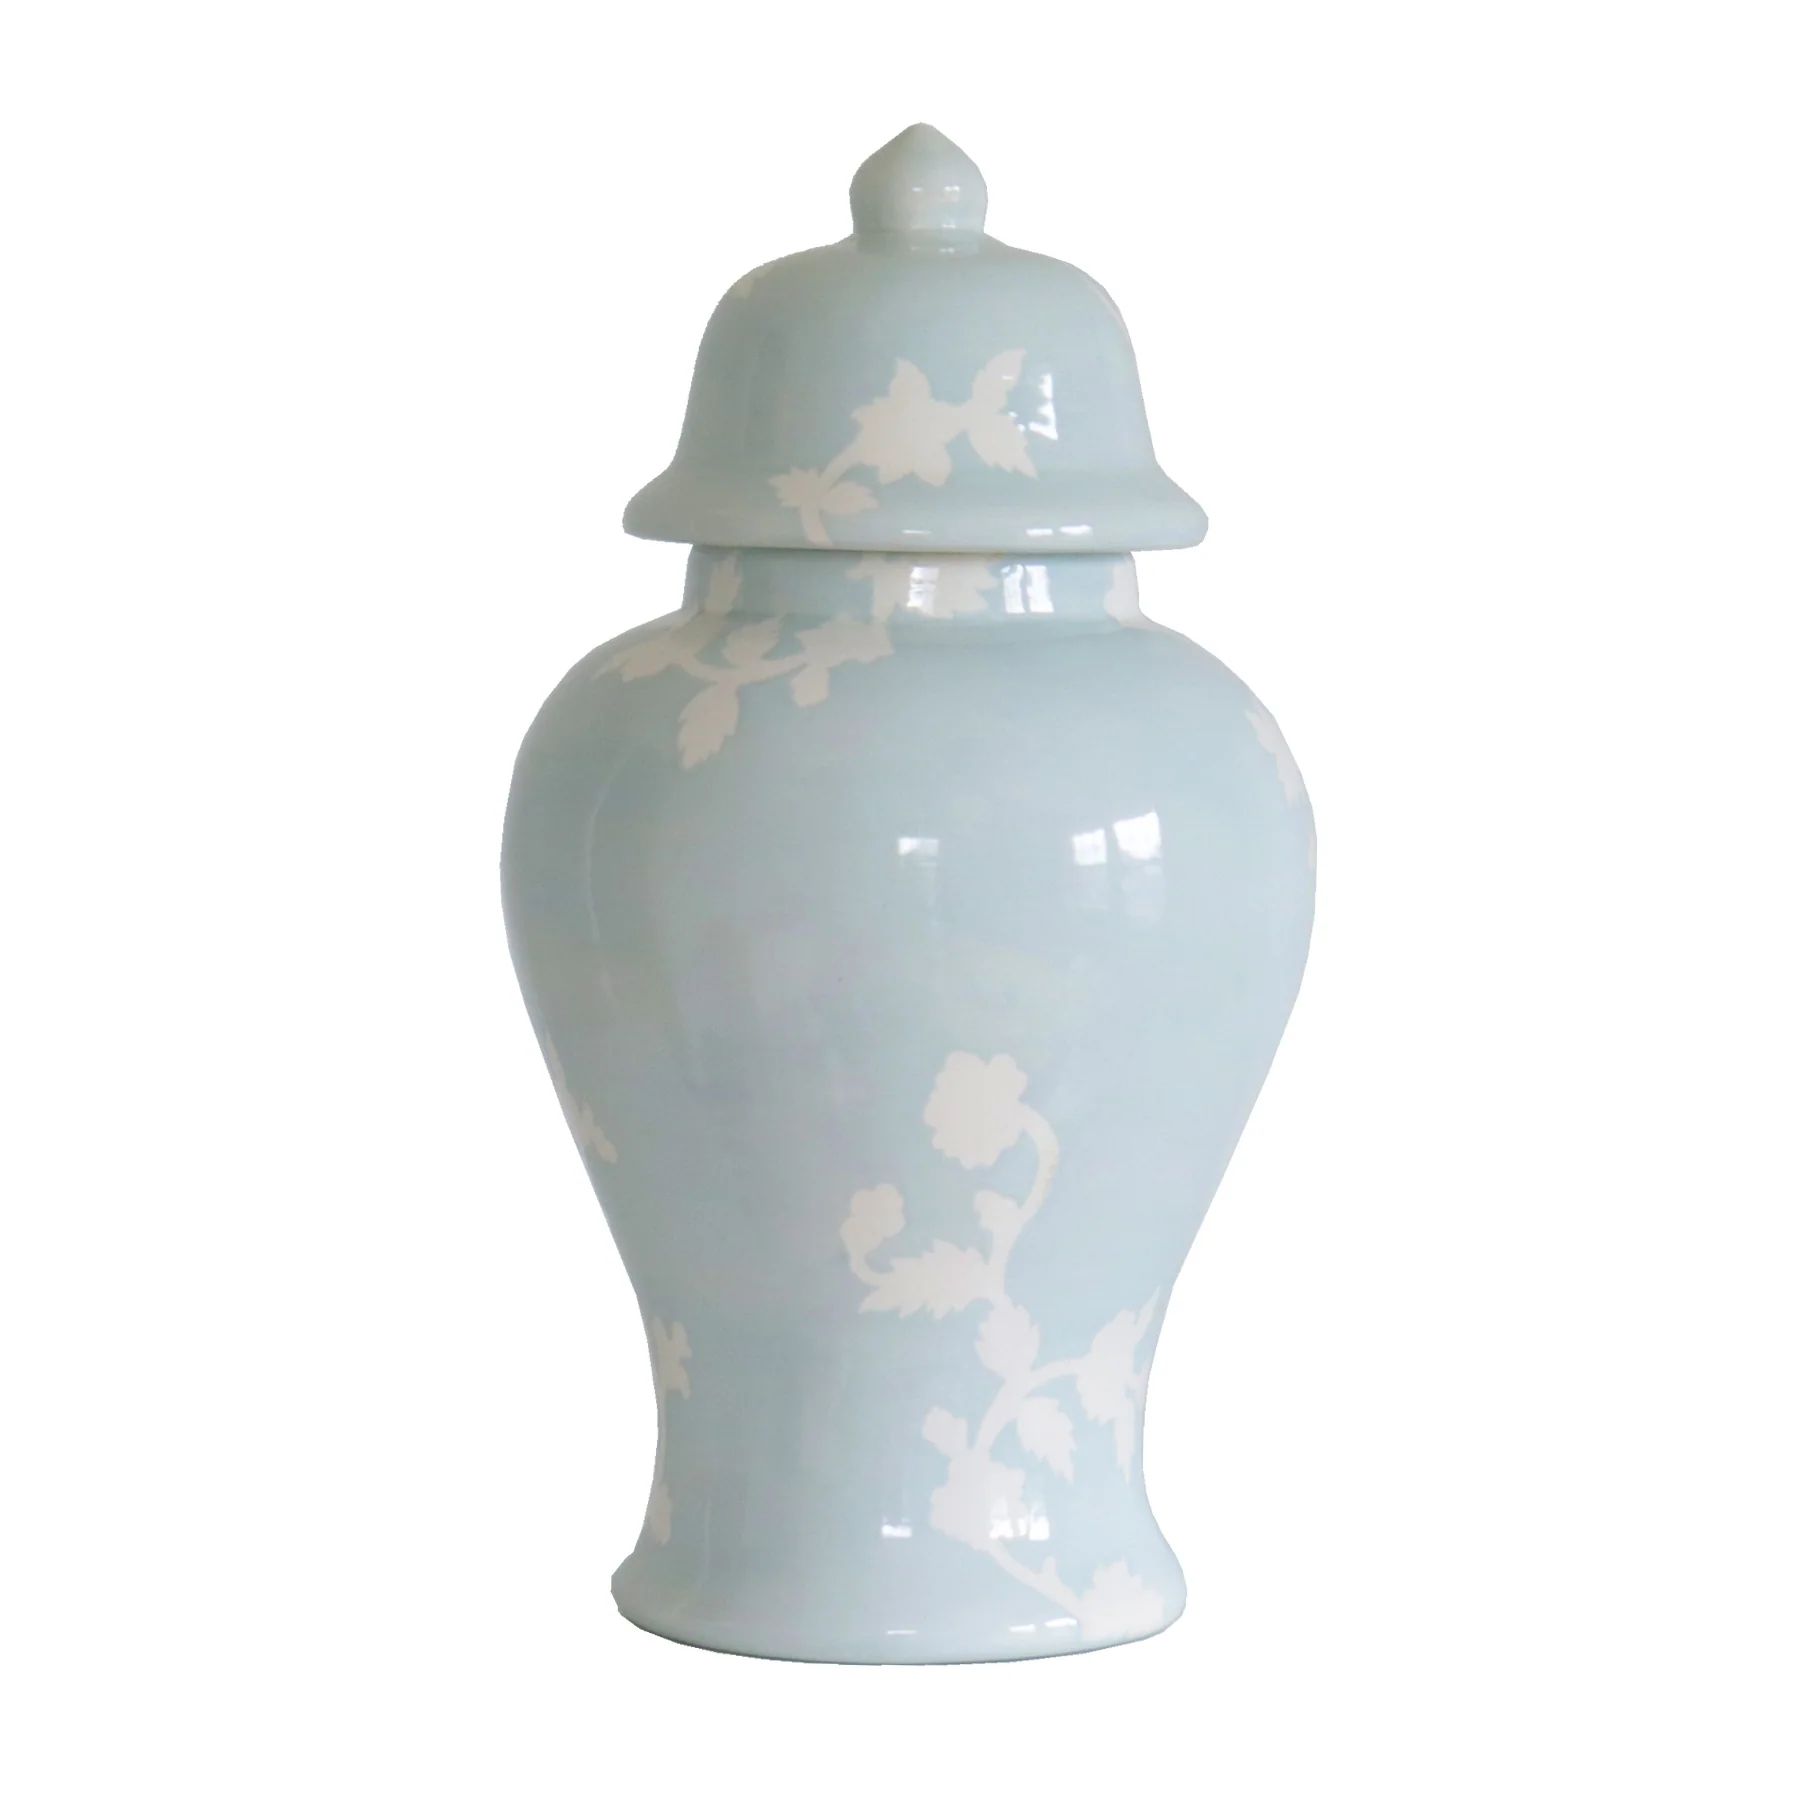 Chinoiserie Dreams Ginger Jars in Hydrangea Light Blue | Lo Home by Lauren Haskell Designs